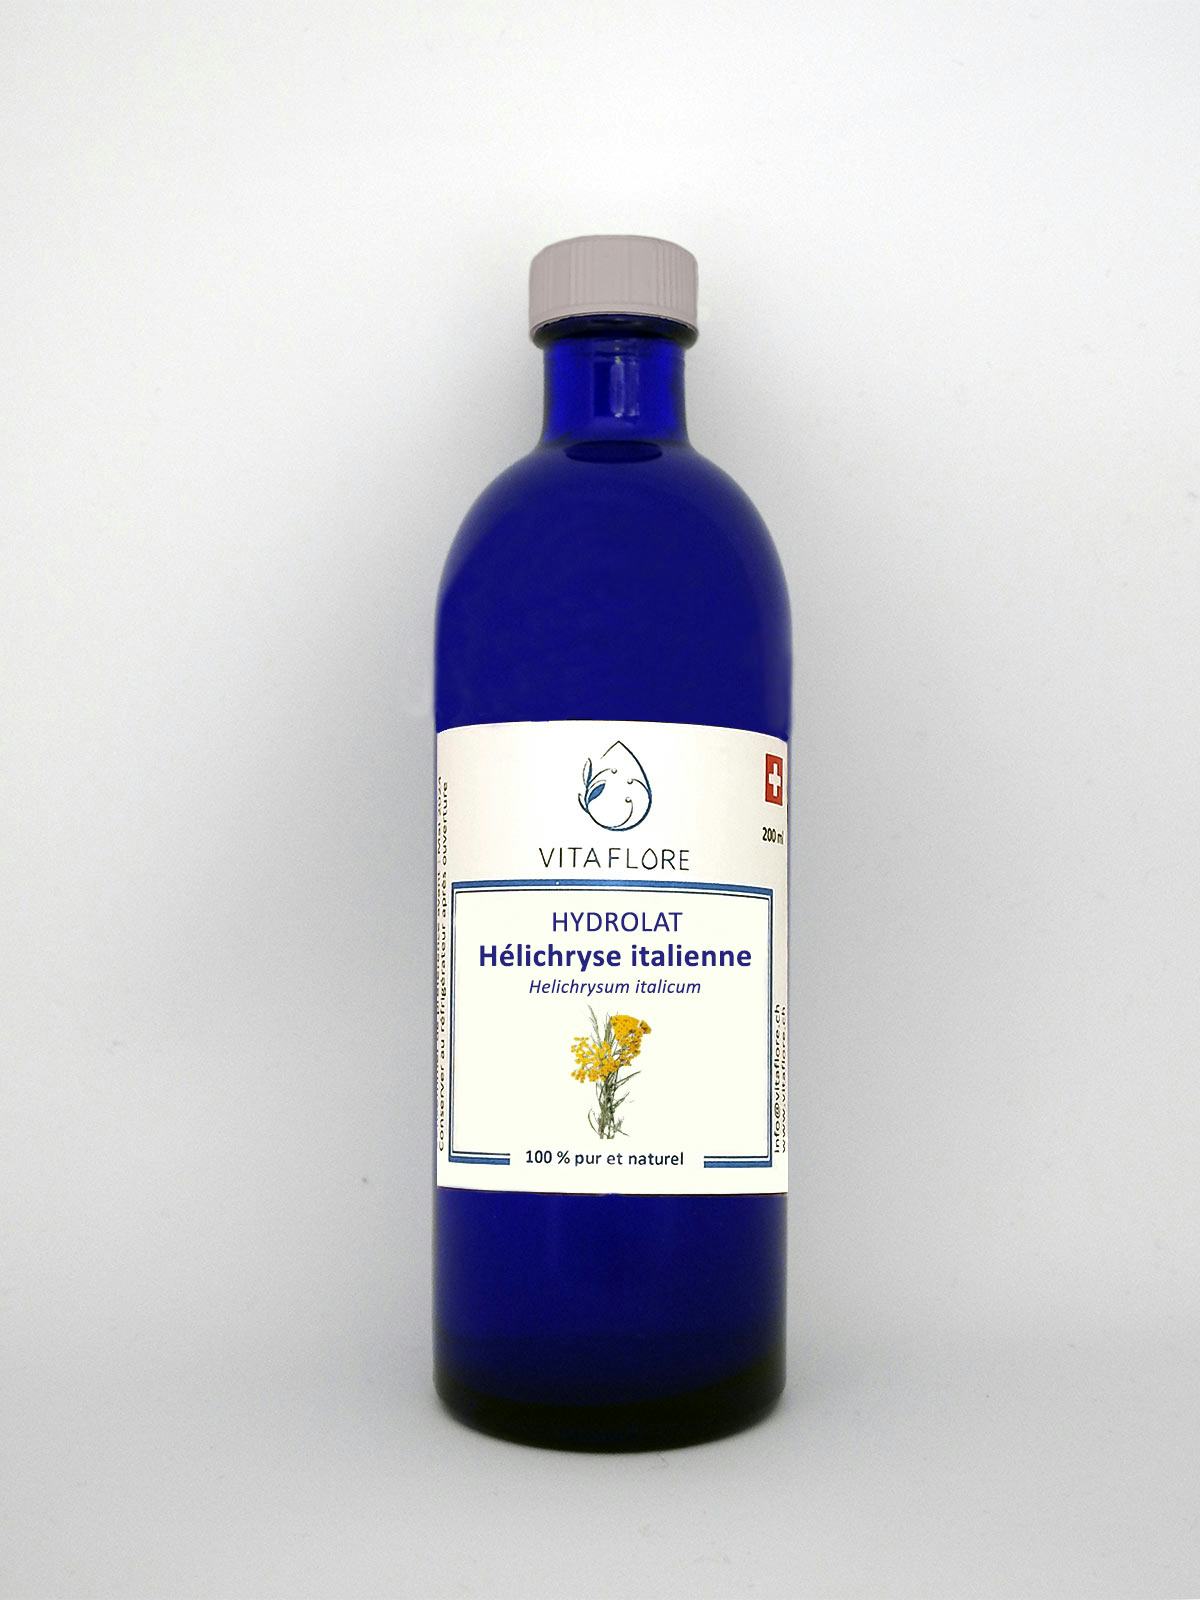 Hydrolat Hélichryse italienne, artisanal product for direct sale in Switzerland